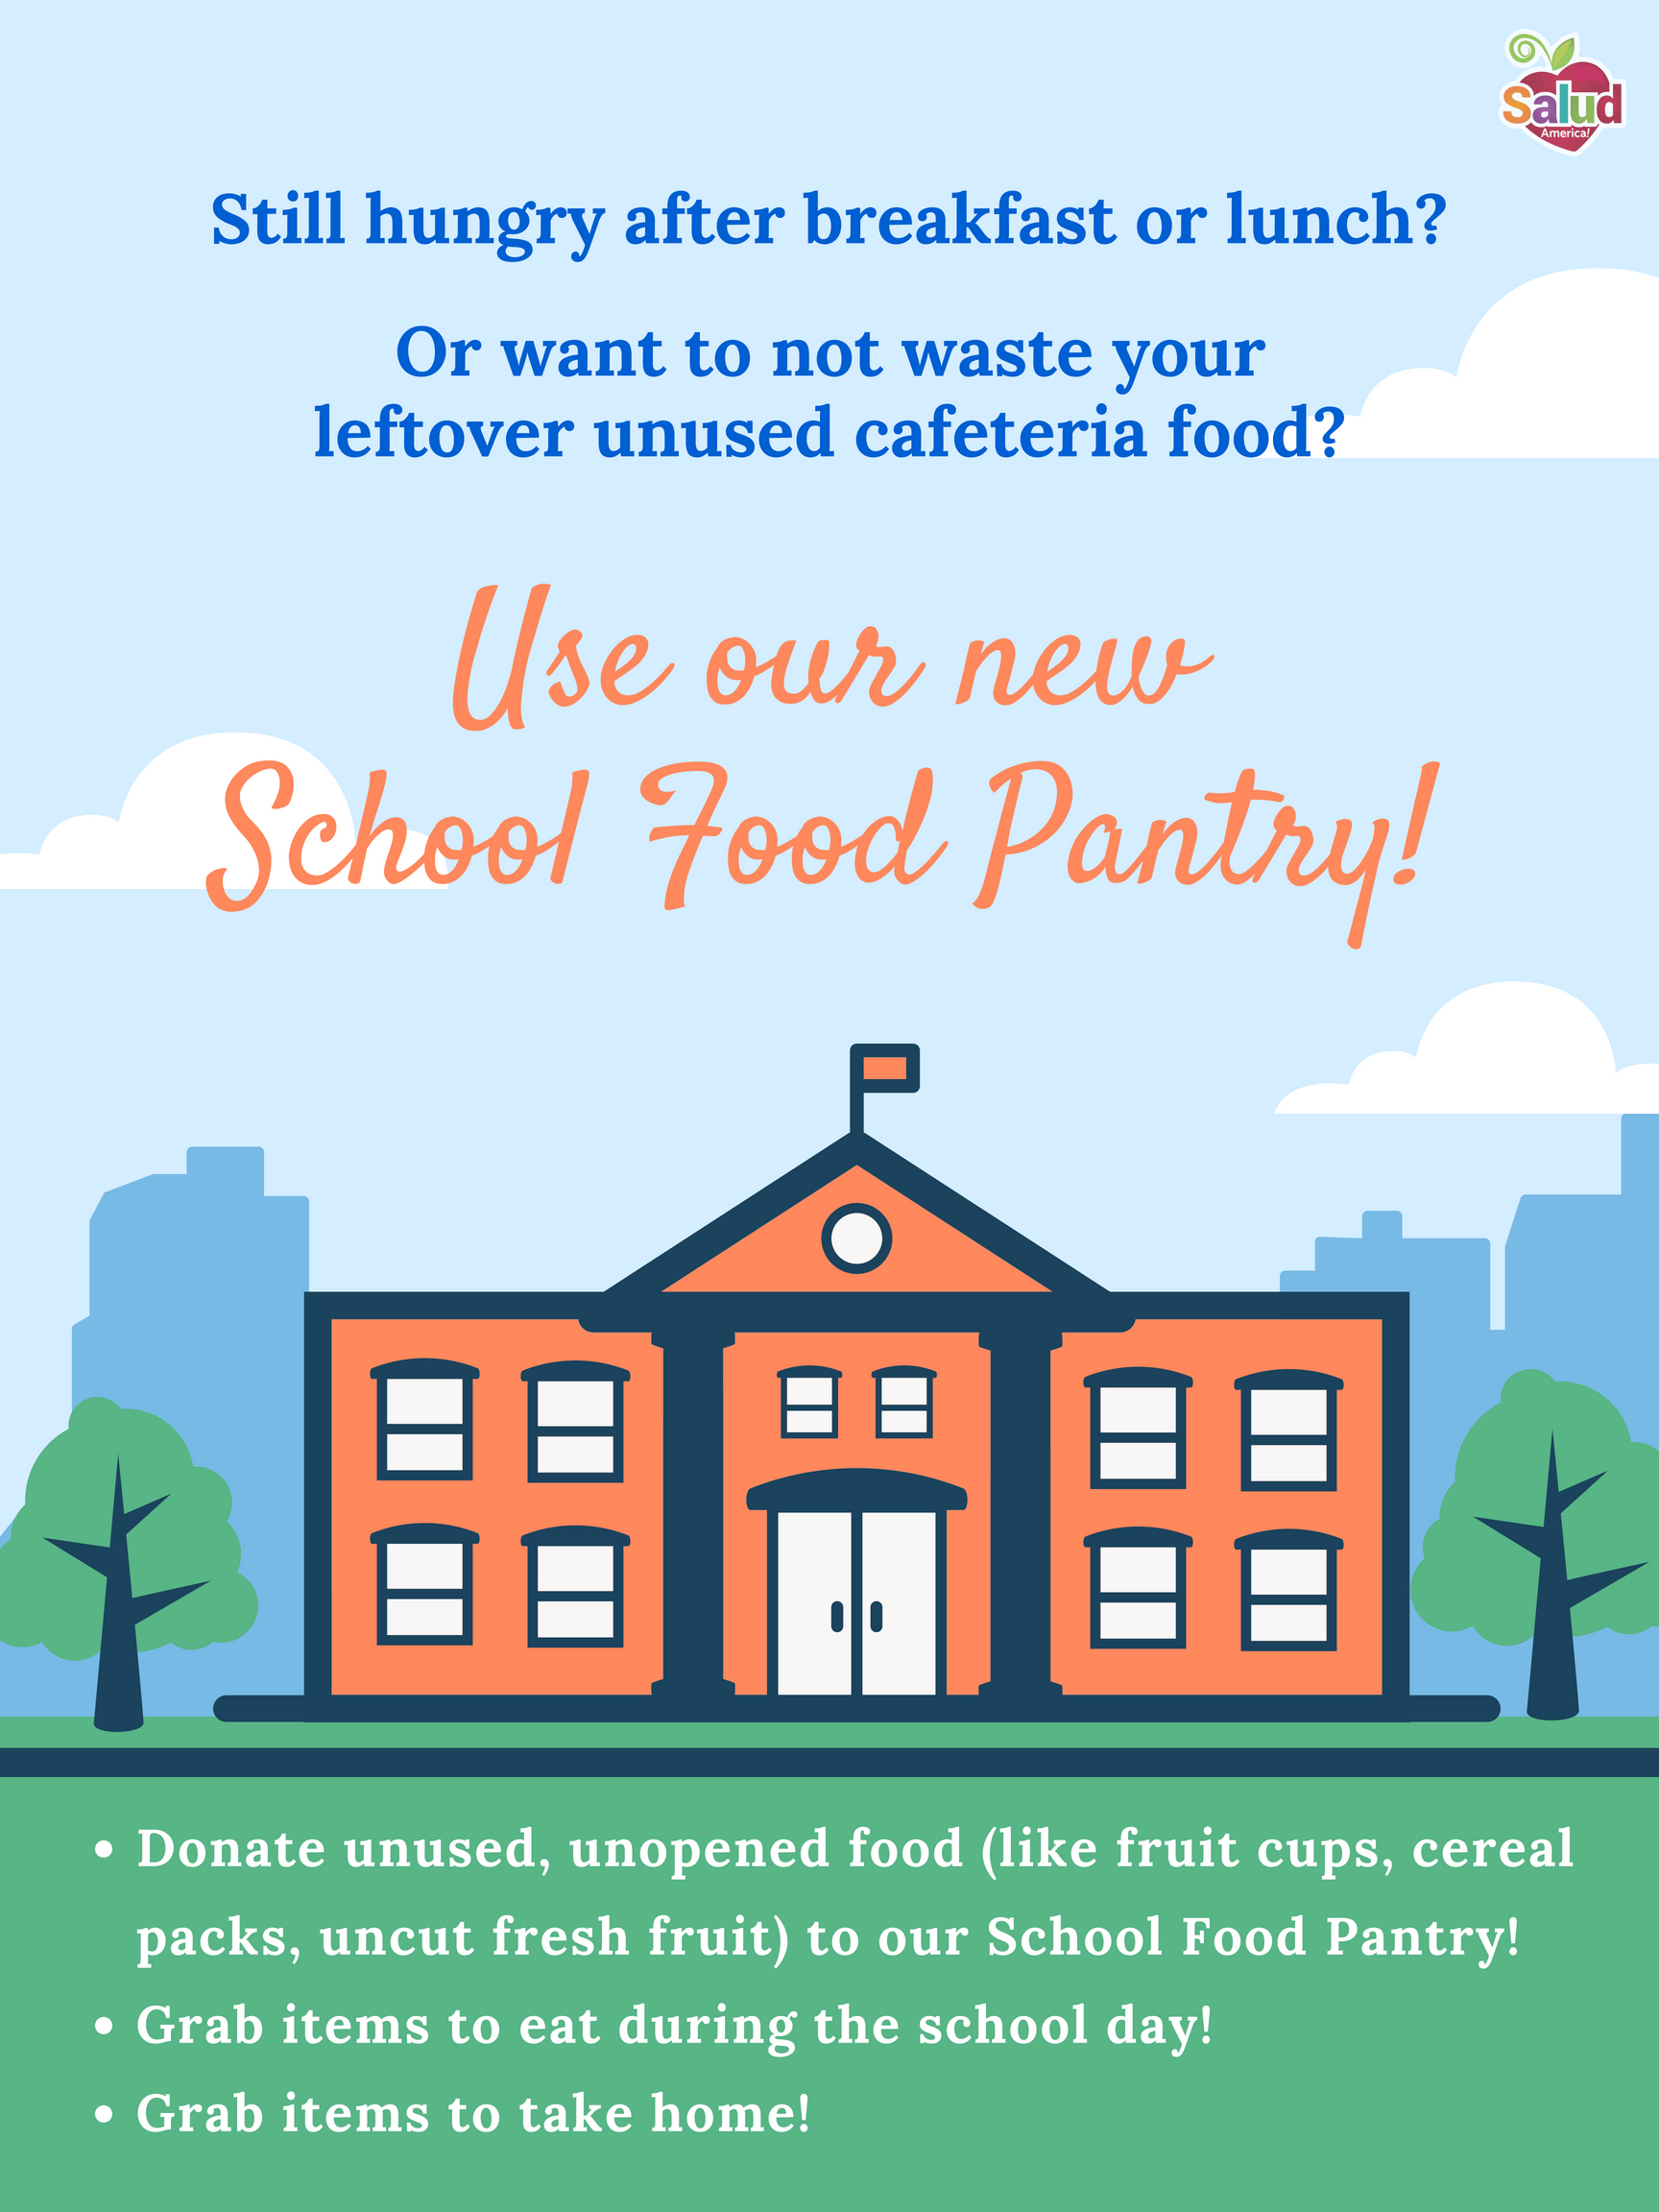 Sign for School Food Pantry